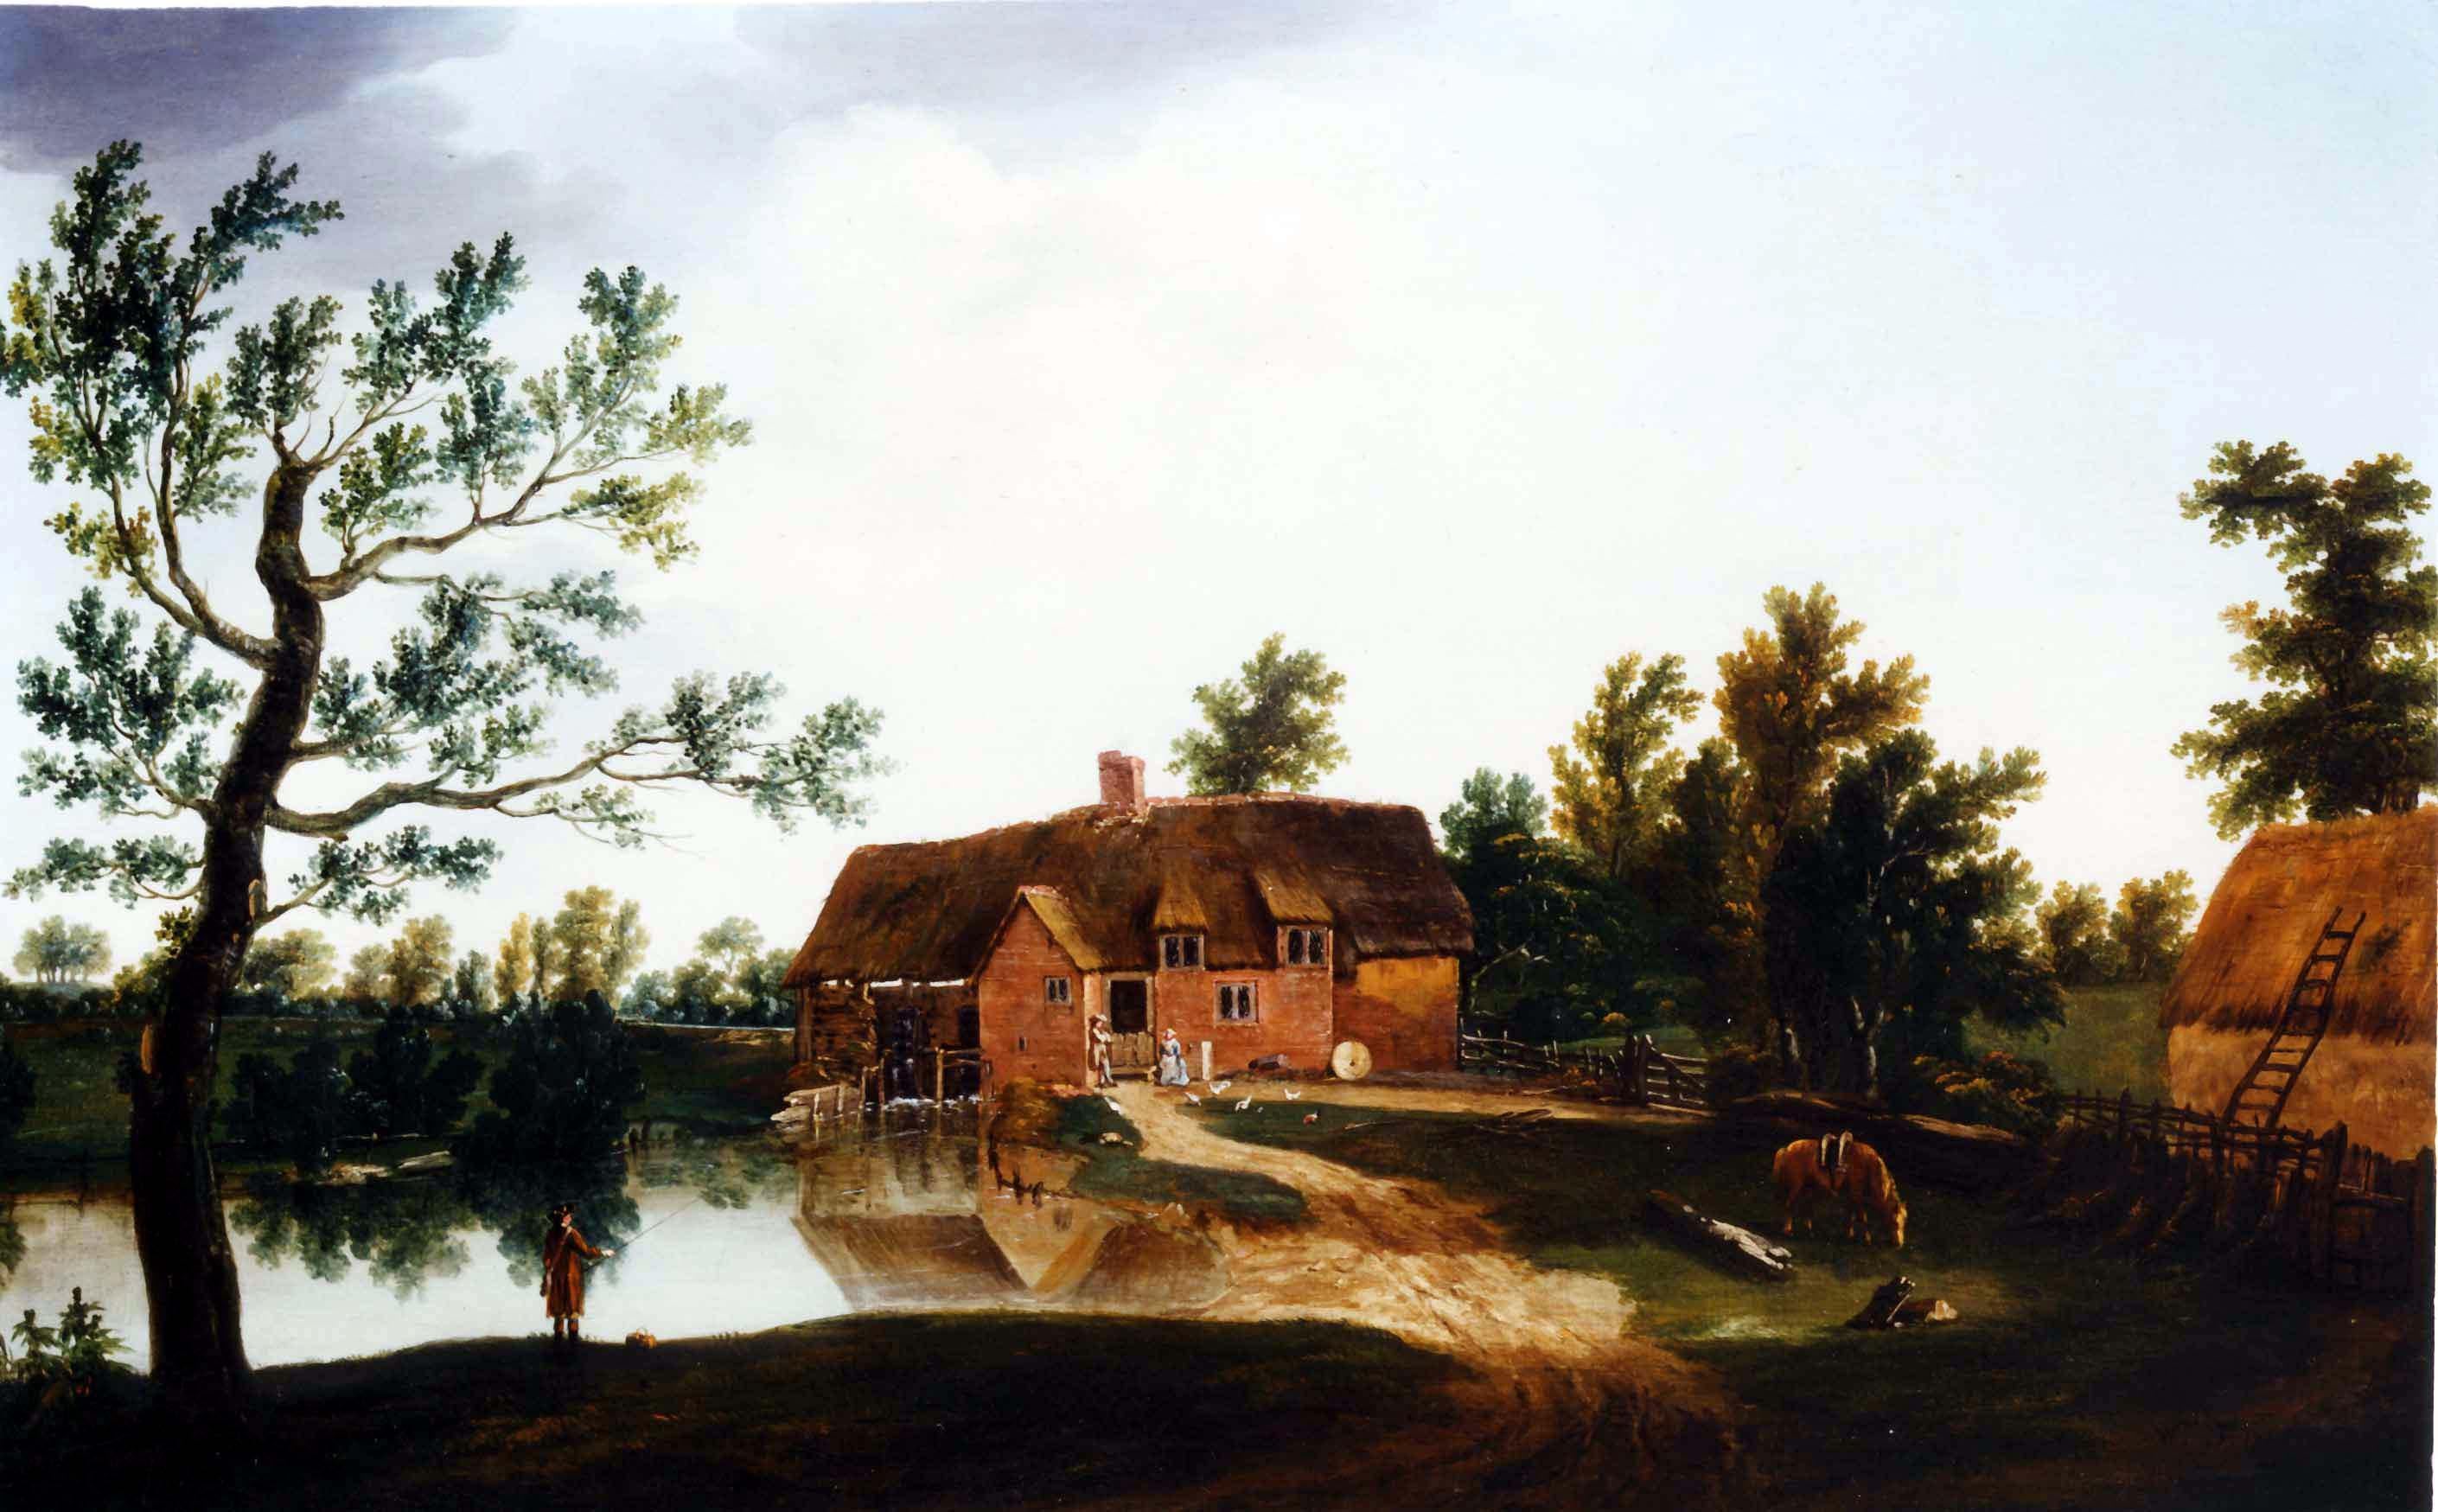 A view of Chamberlain's Mill at Bere Regis, Dorset - Painting by William Tomkins